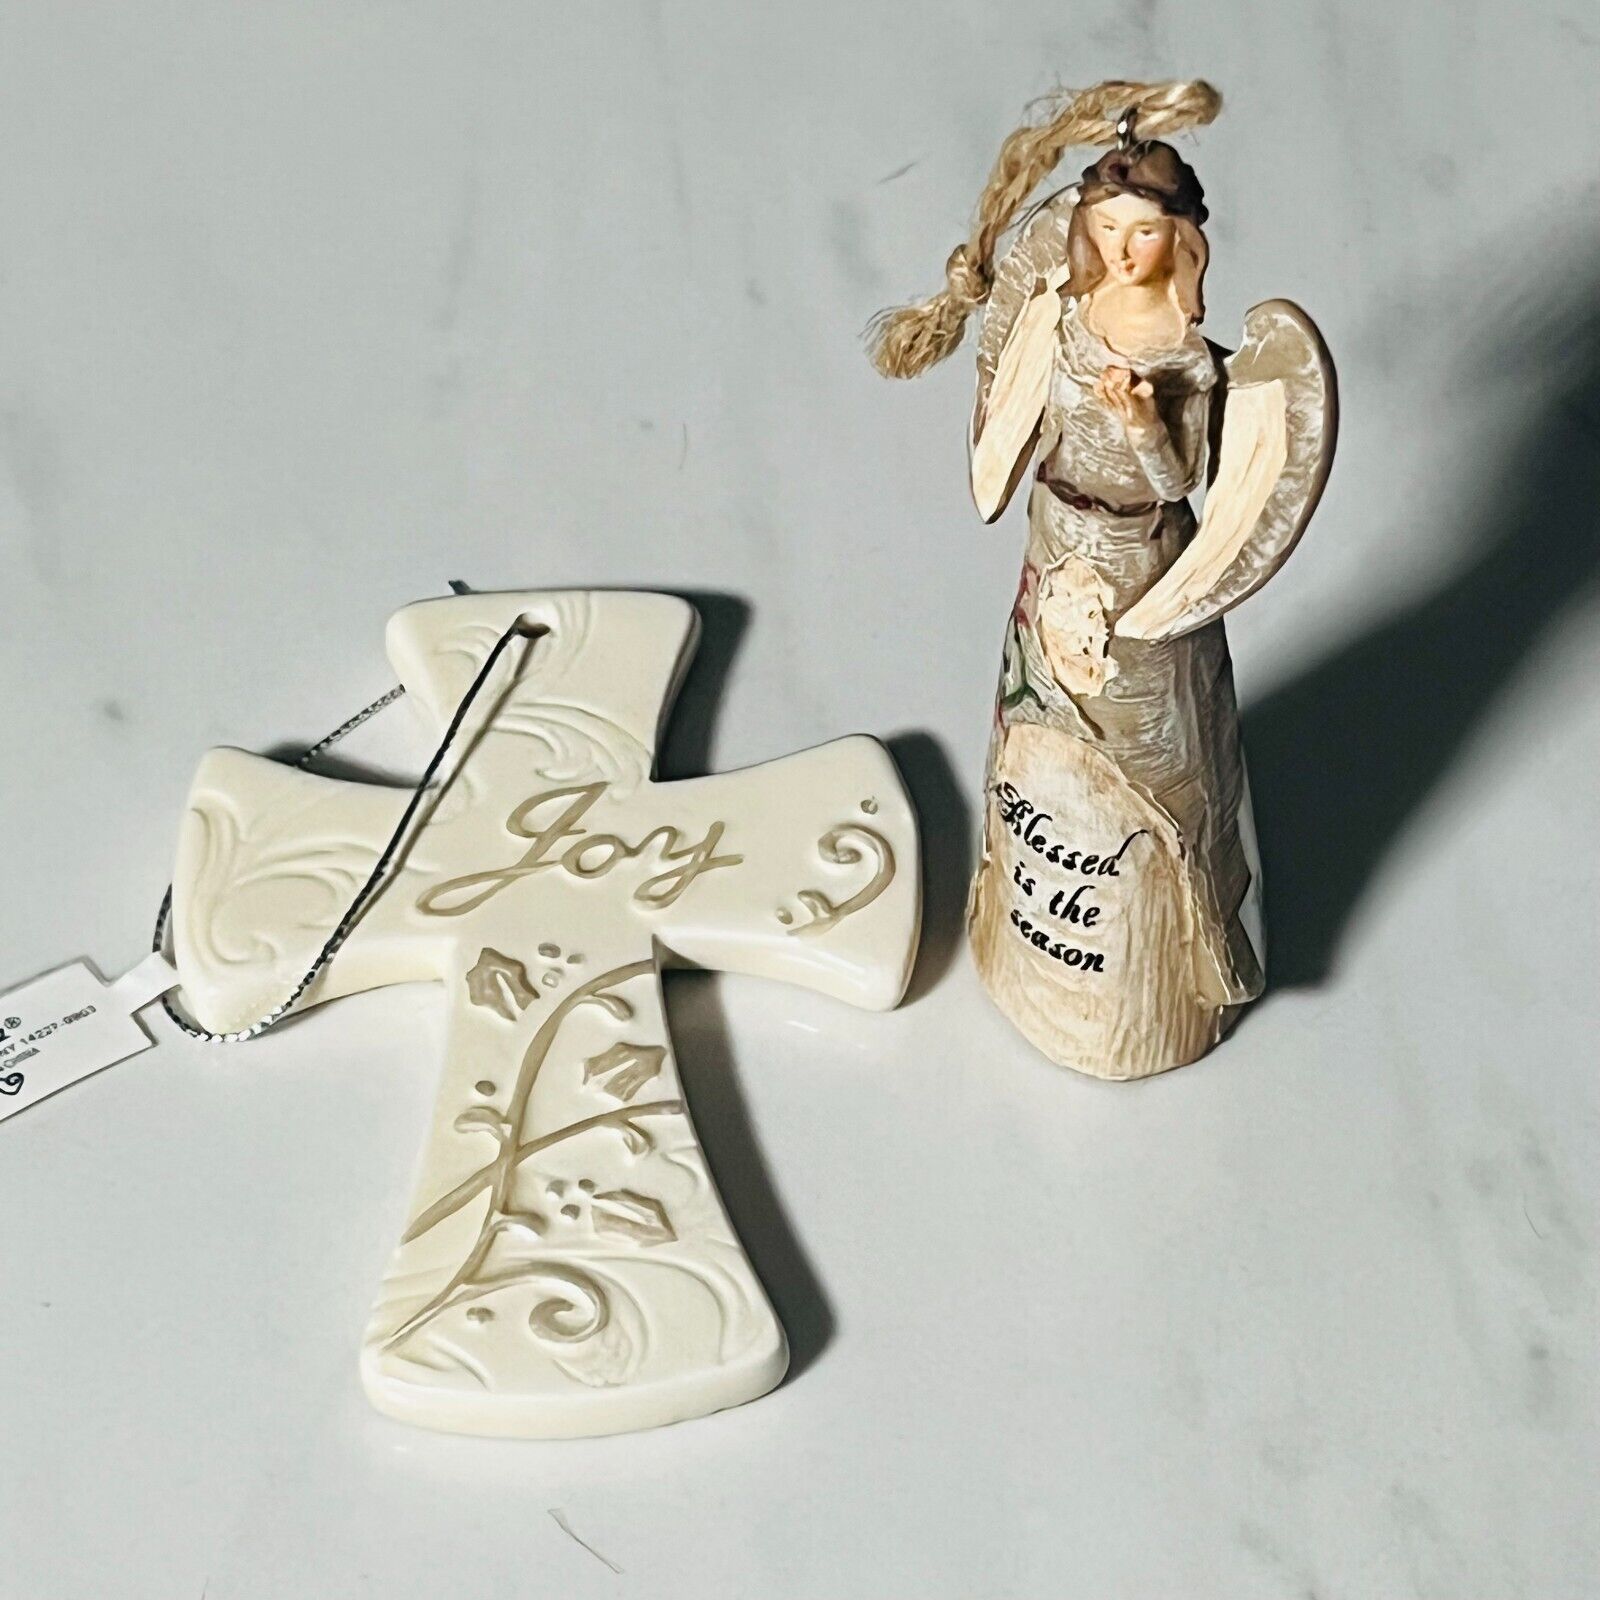 Lot of 2 Ornaments - Ceramic Joy by Ganz - Blessed Angel by Enesco - 2015 - BB